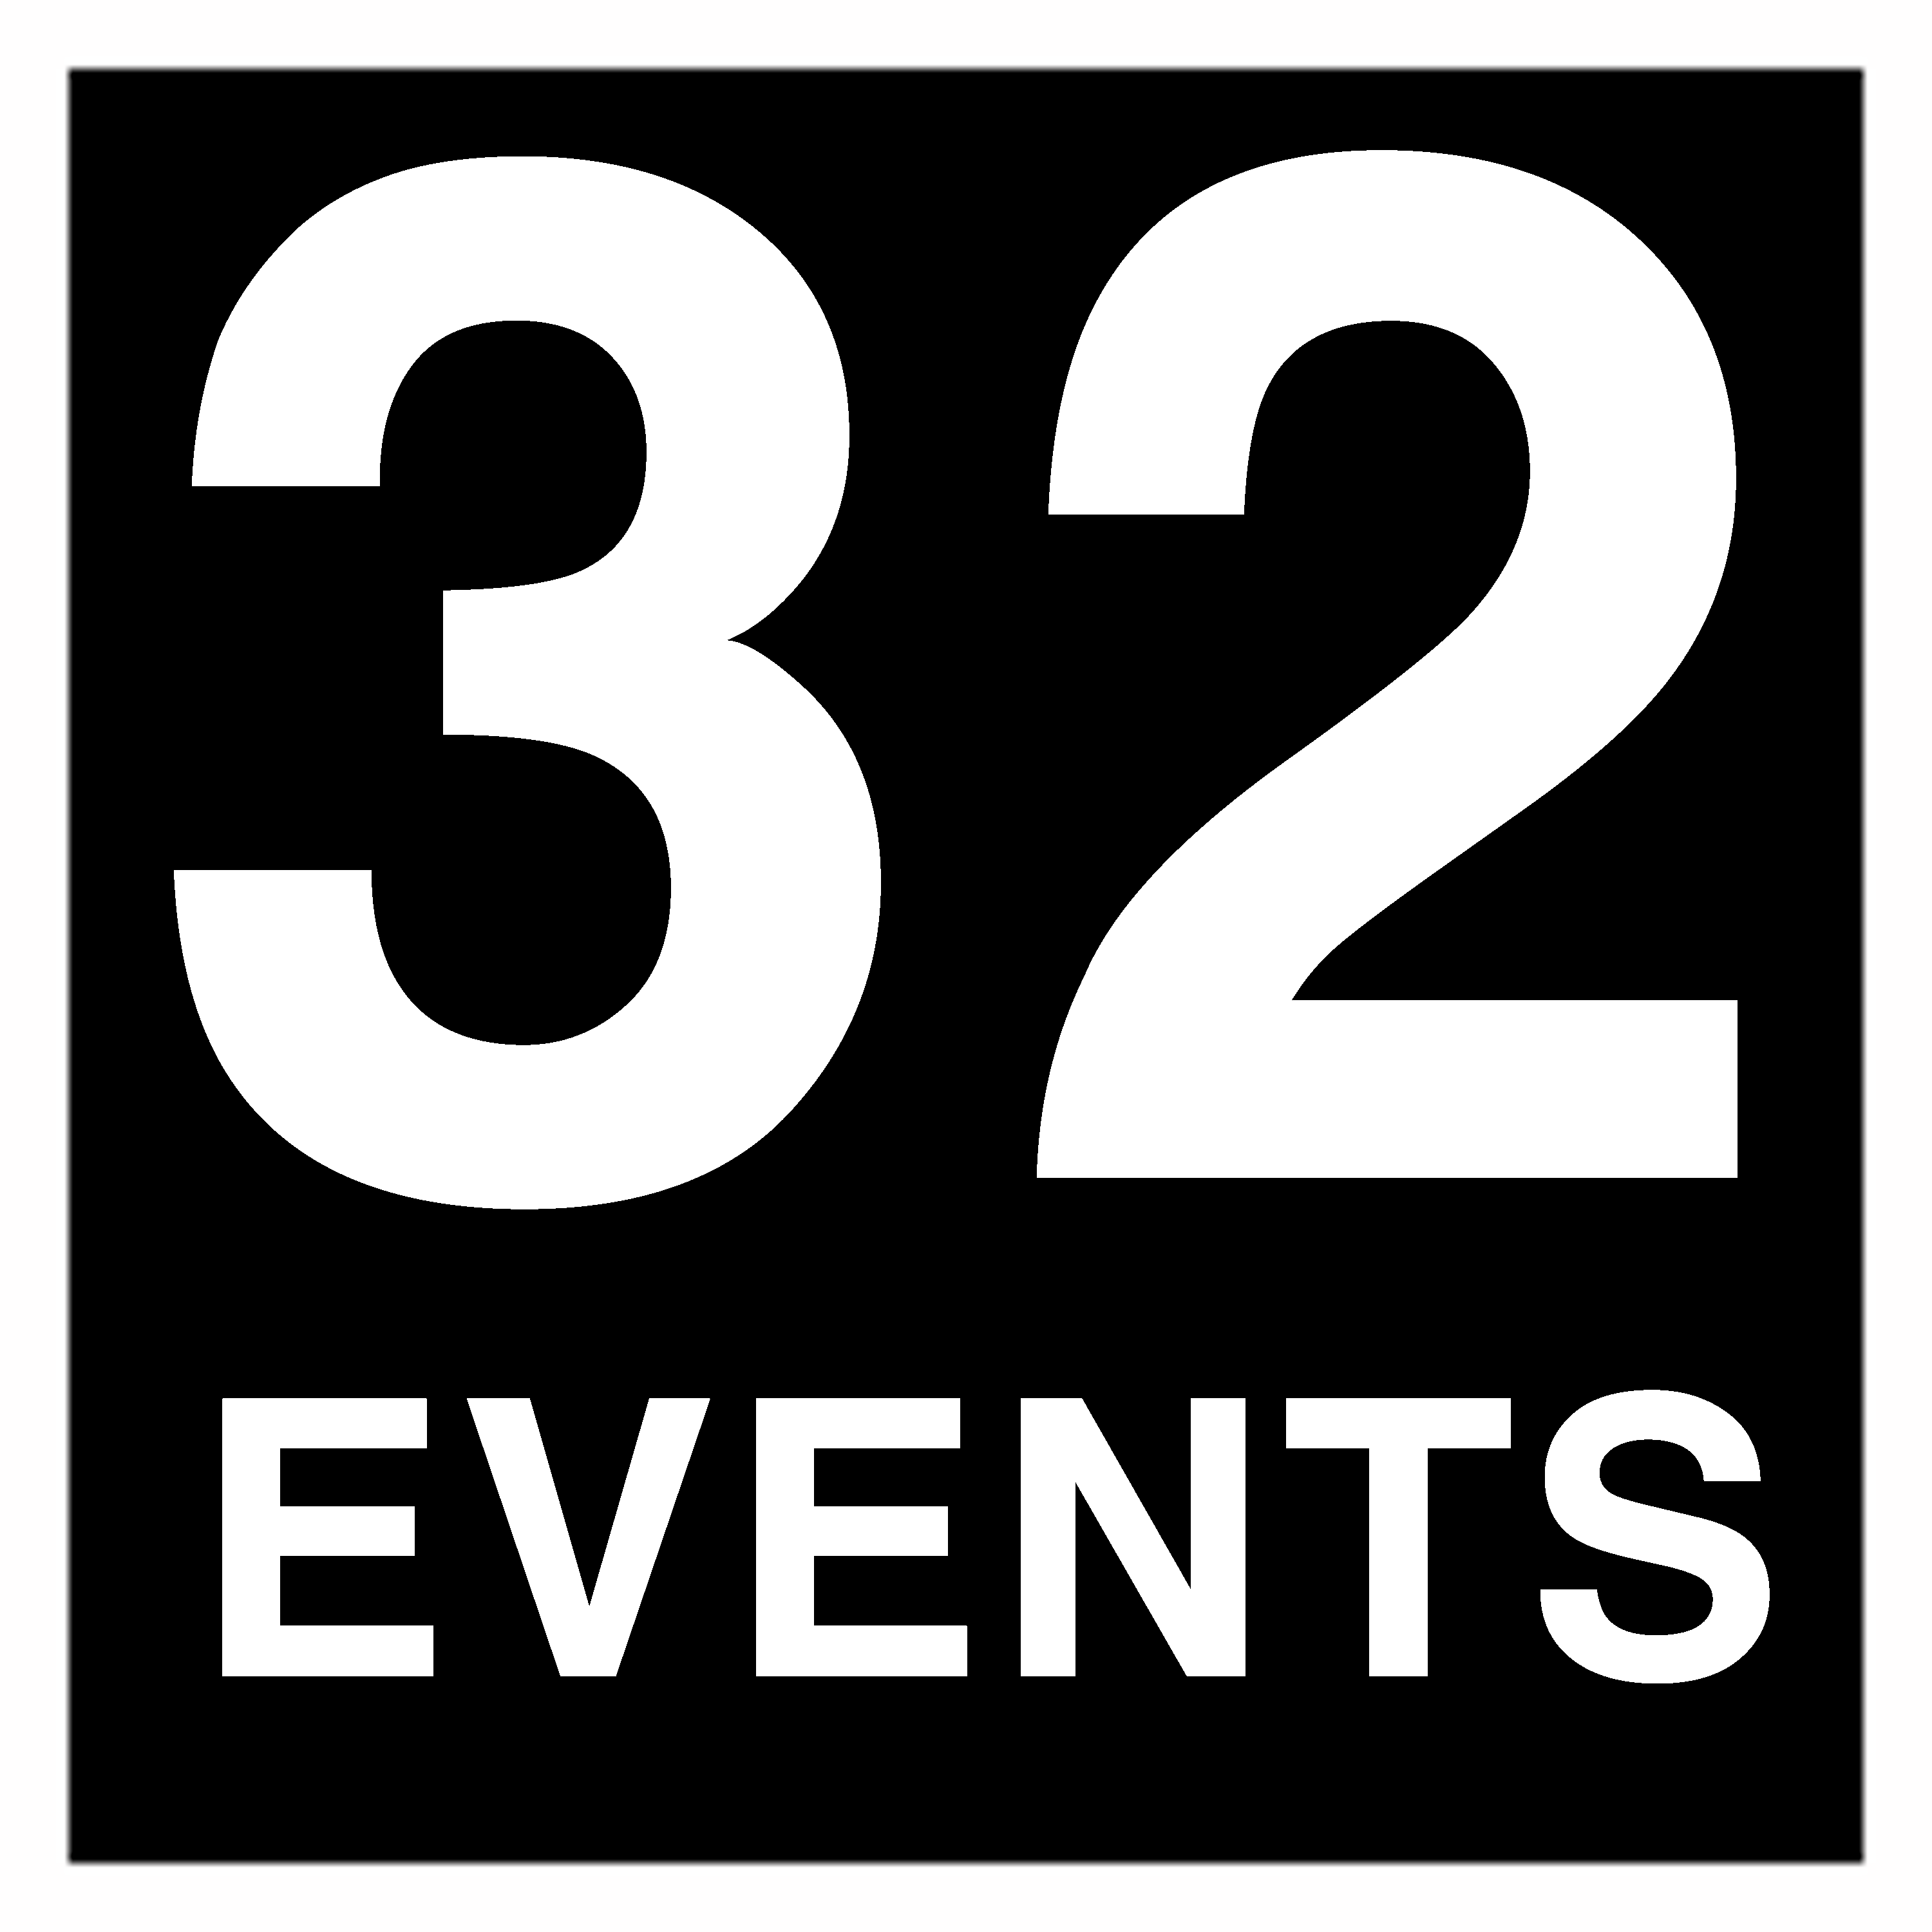 32 events logo high res.png